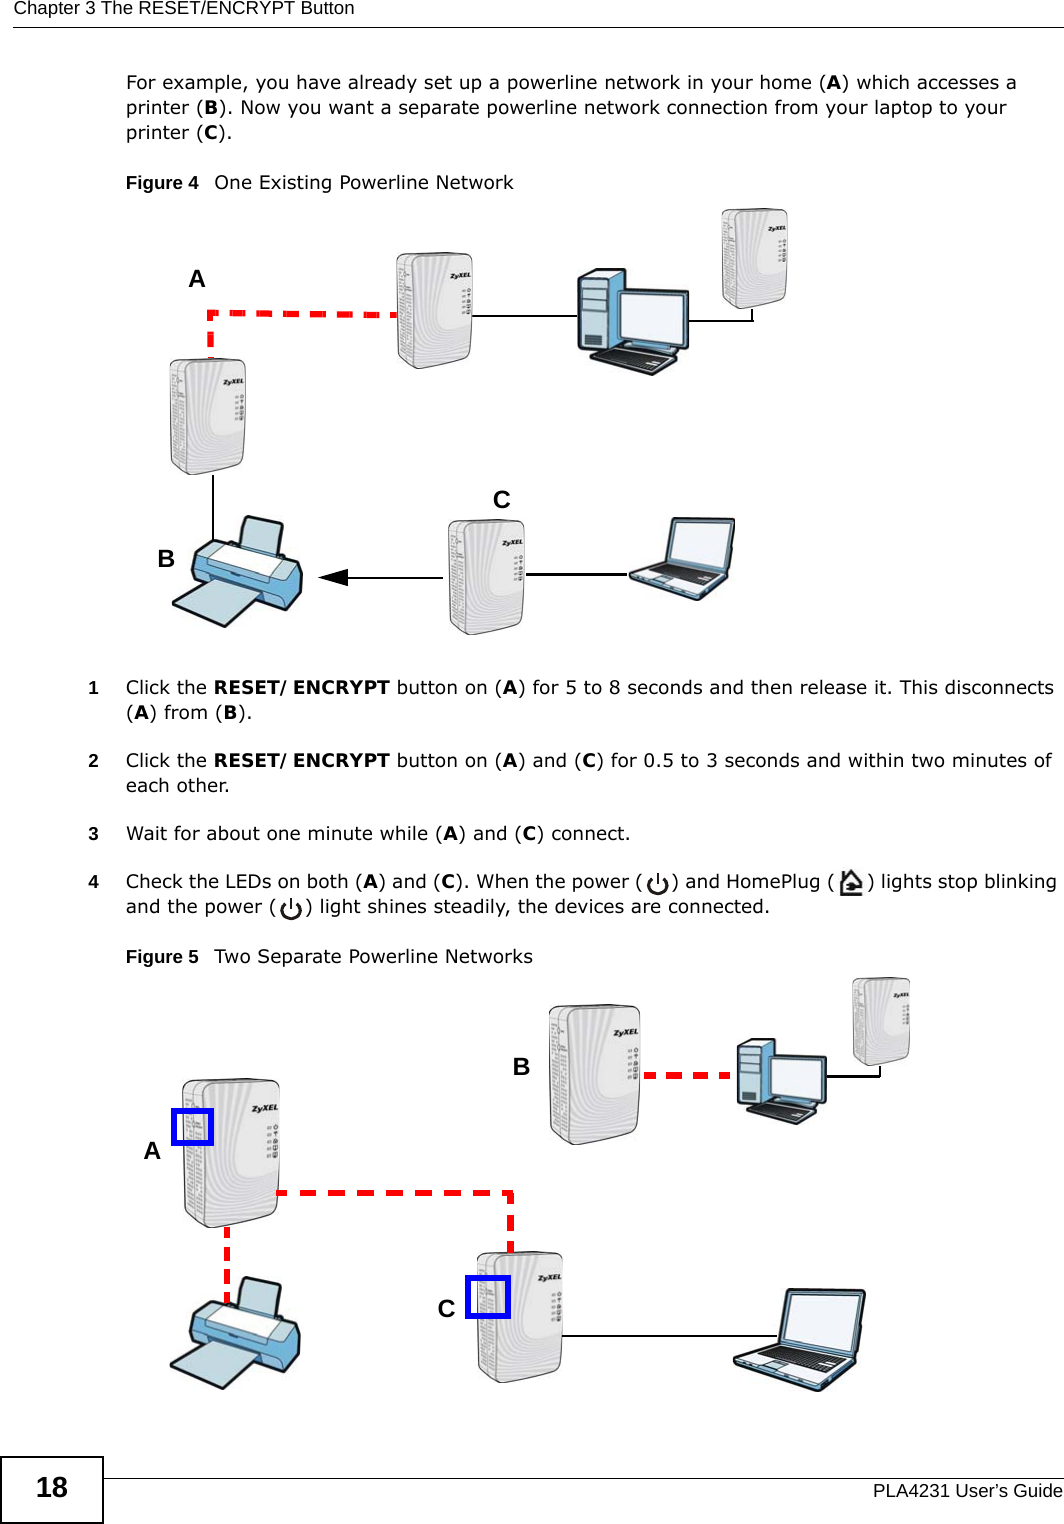 Chapter 3 The RESET/ENCRYPT ButtonPLA4231 User’s Guide18For example, you have already set up a powerline network in your home (A) which accesses a printer (B). Now you want a separate powerline network connection from your laptop to your printer (C).Figure 4   One Existing Powerline Network 1Click the RESET/ENCRYPT button on (A) for 5 to 8 seconds and then release it. This disconnects (A) from (B). 2Click the RESET/ENCRYPT button on (A) and (C) for 0.5 to 3 seconds and within two minutes of each other.3Wait for about one minute while (A) and (C) connect.4Check the LEDs on both (A) and (C). When the power ( ) and HomePlug ( ) lights stop blinking and the power ( ) light shines steadily, the devices are connected. Figure 5   Two Separate Powerline Networks ACBACB